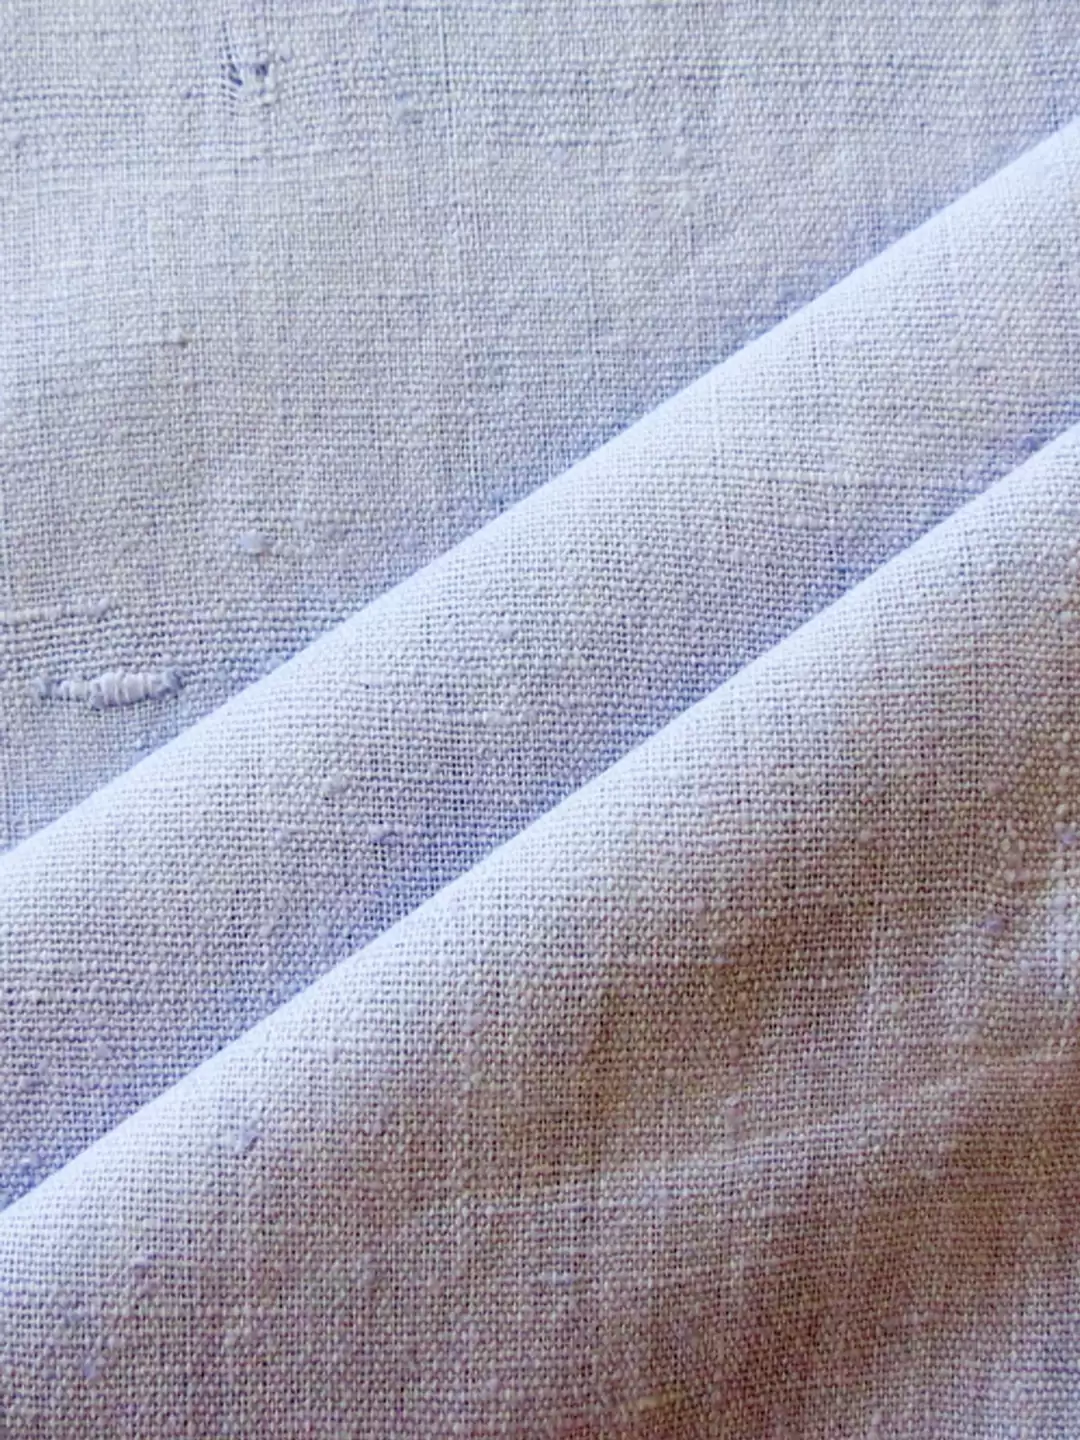 PURE COTTON KHADI PLAIN COLOR SHIRTING FABRIC 44 Inches (Length 2.30 Meter)